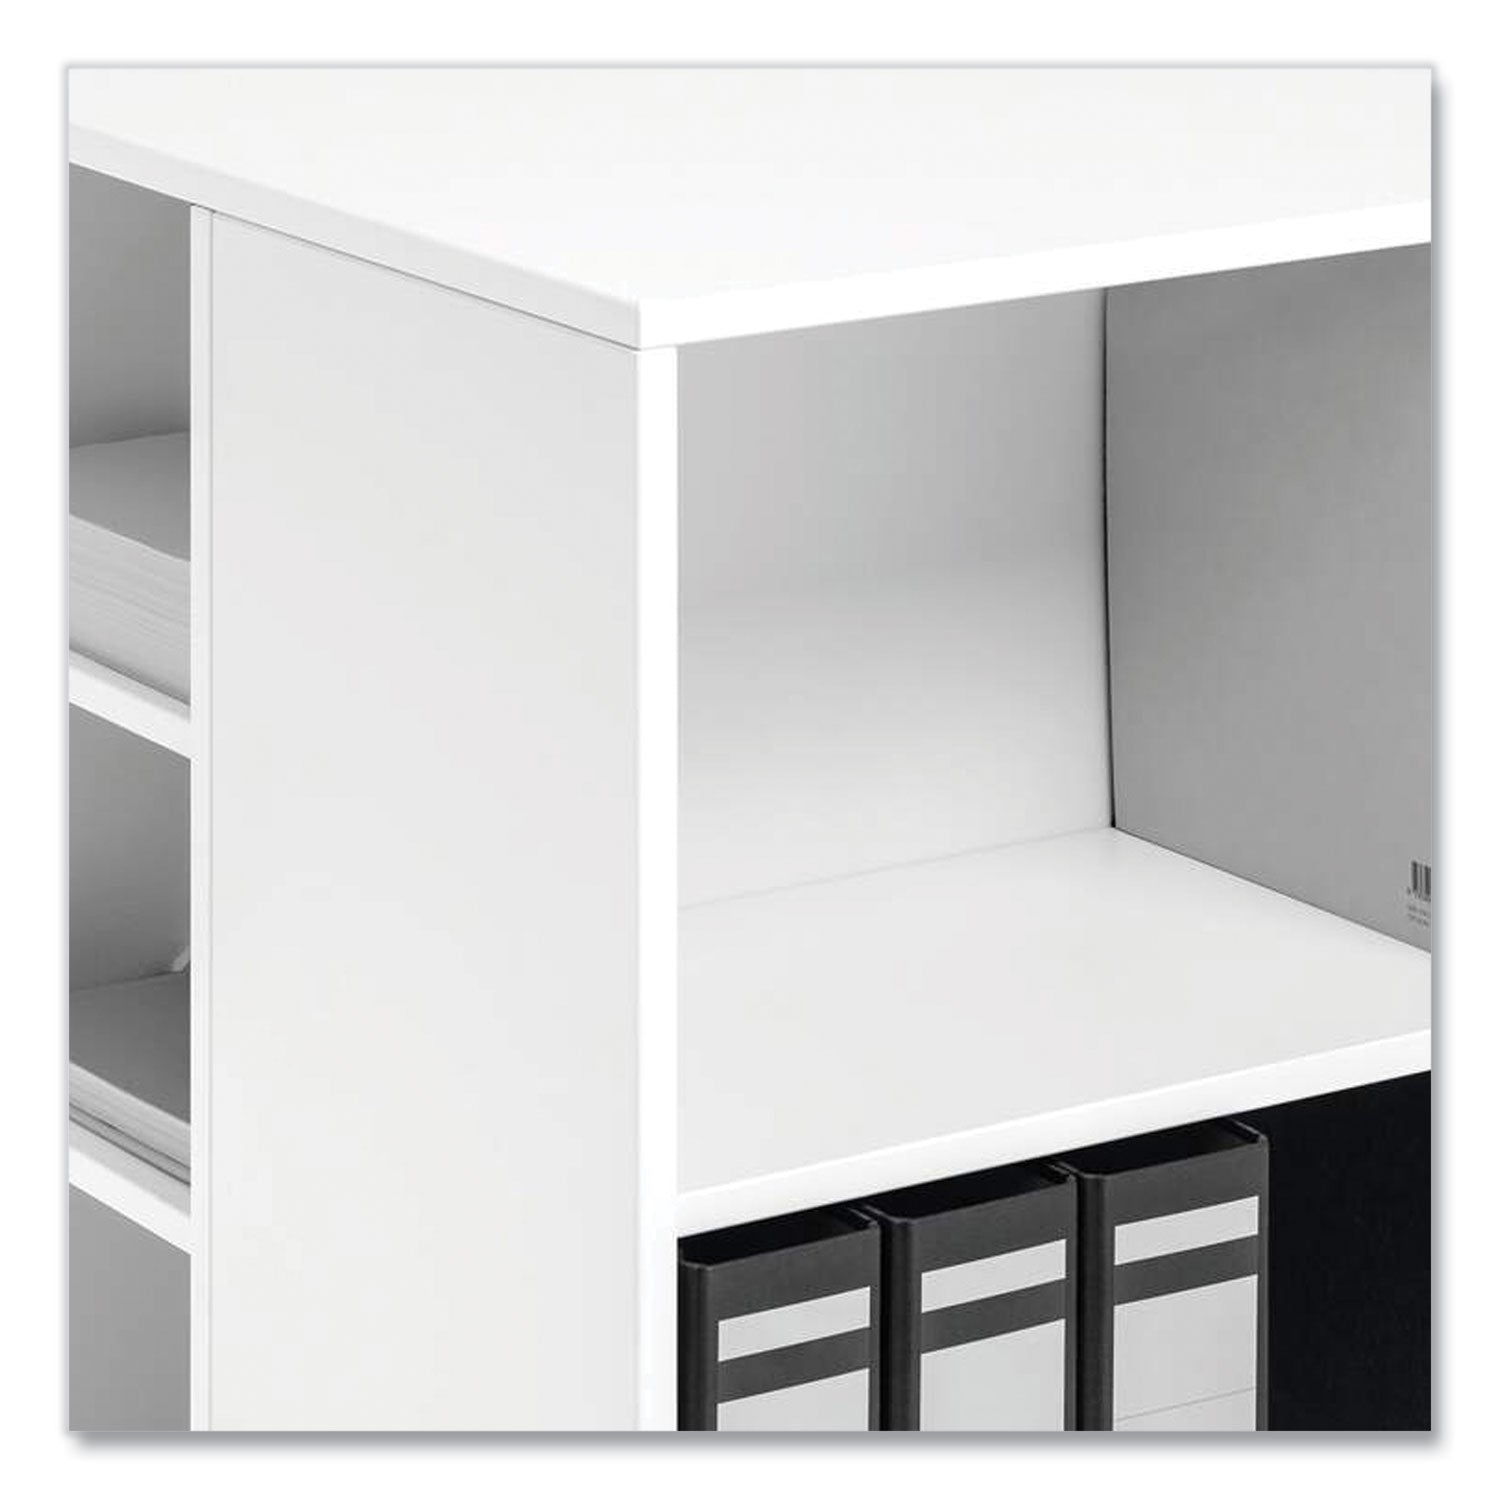 flexible-multi-functional-cart-for-office-storage-wood-6-shelves-2079-x-2331-x-2945-white_dbl311302 - 3